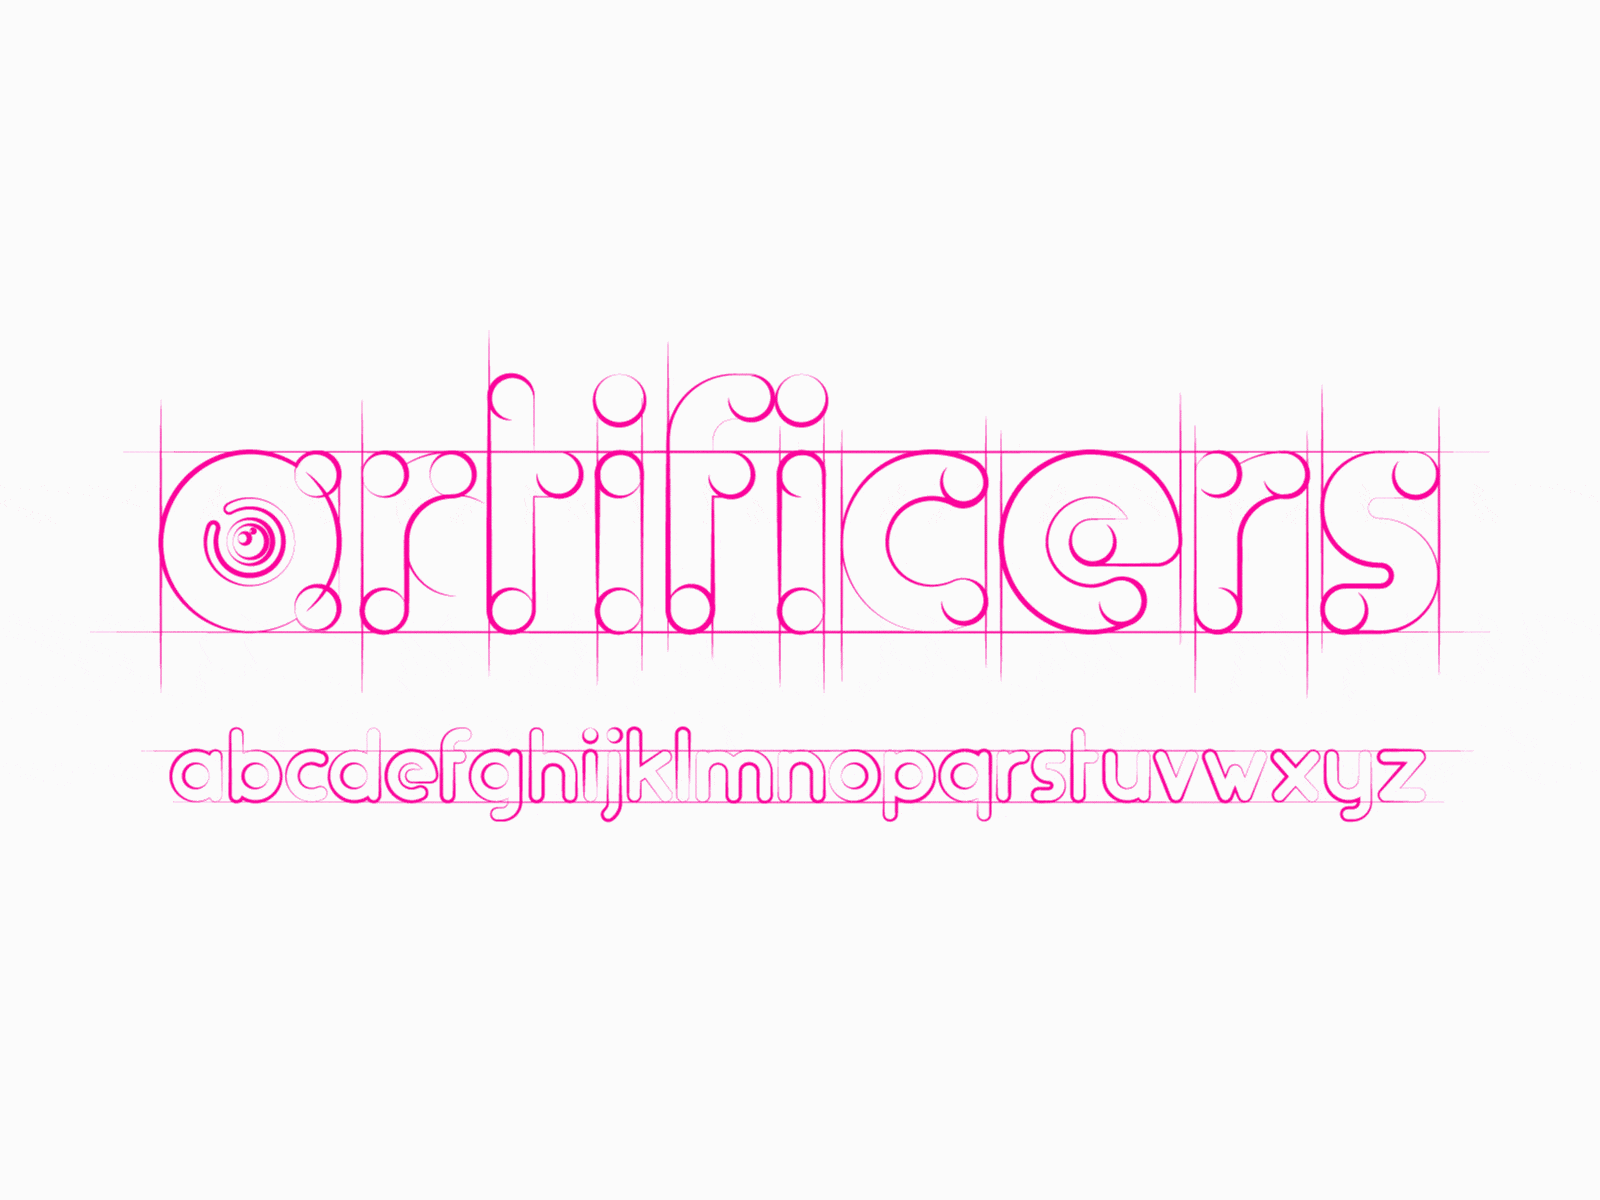 An animated picture of the Artificers typeface